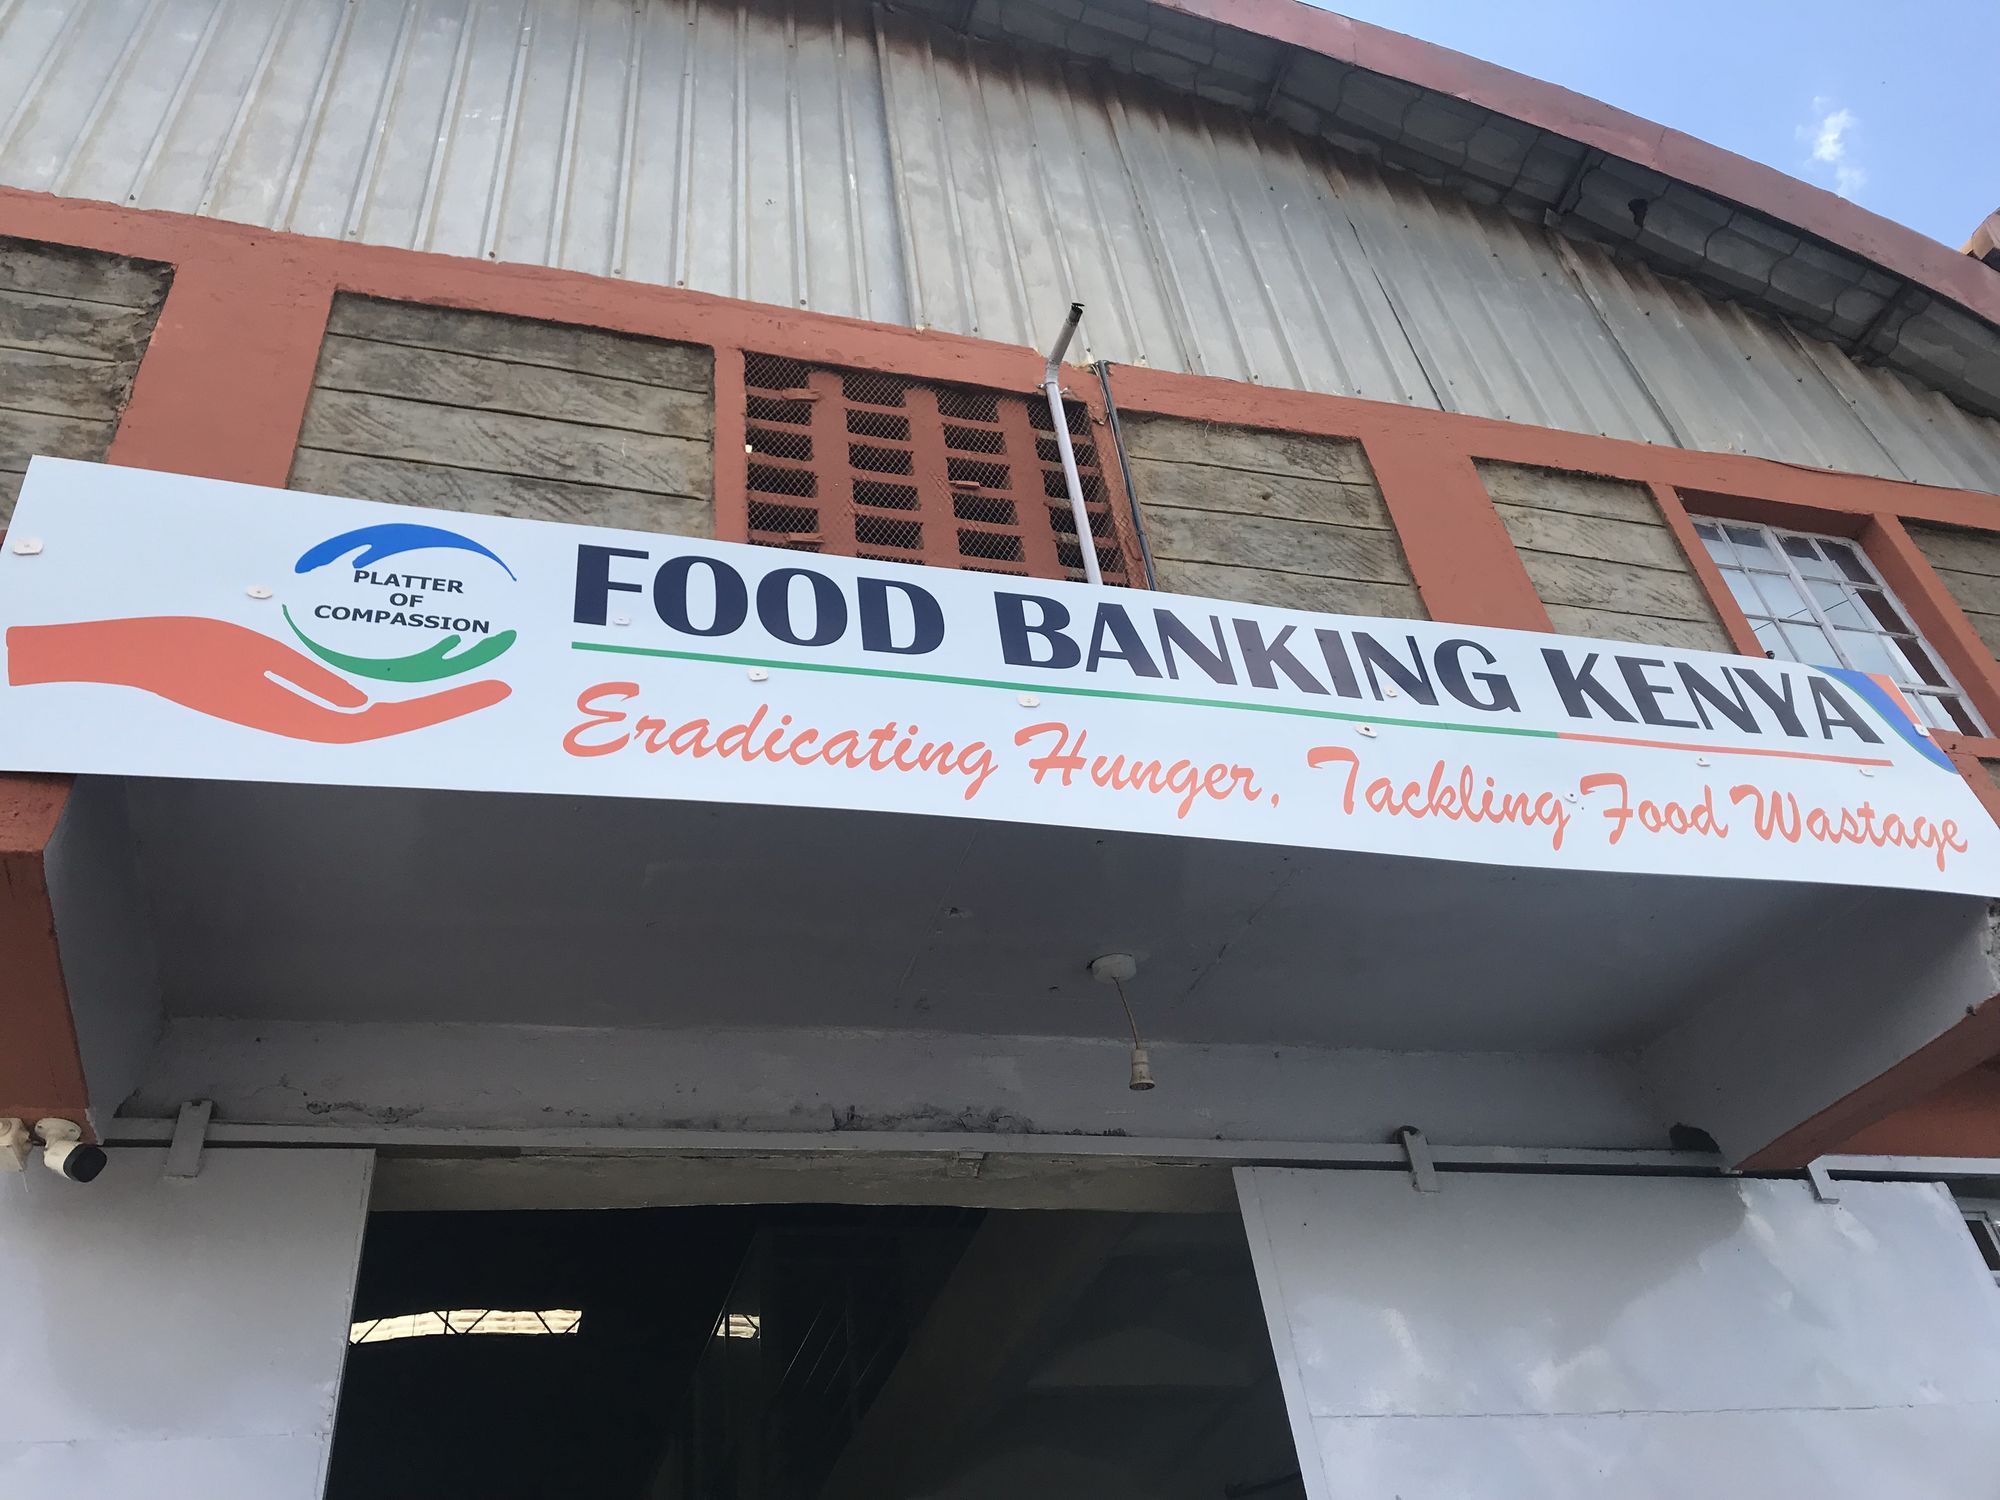 Group 1 was kindly hosted by Food Banking Kenya headquarter during the field visit.